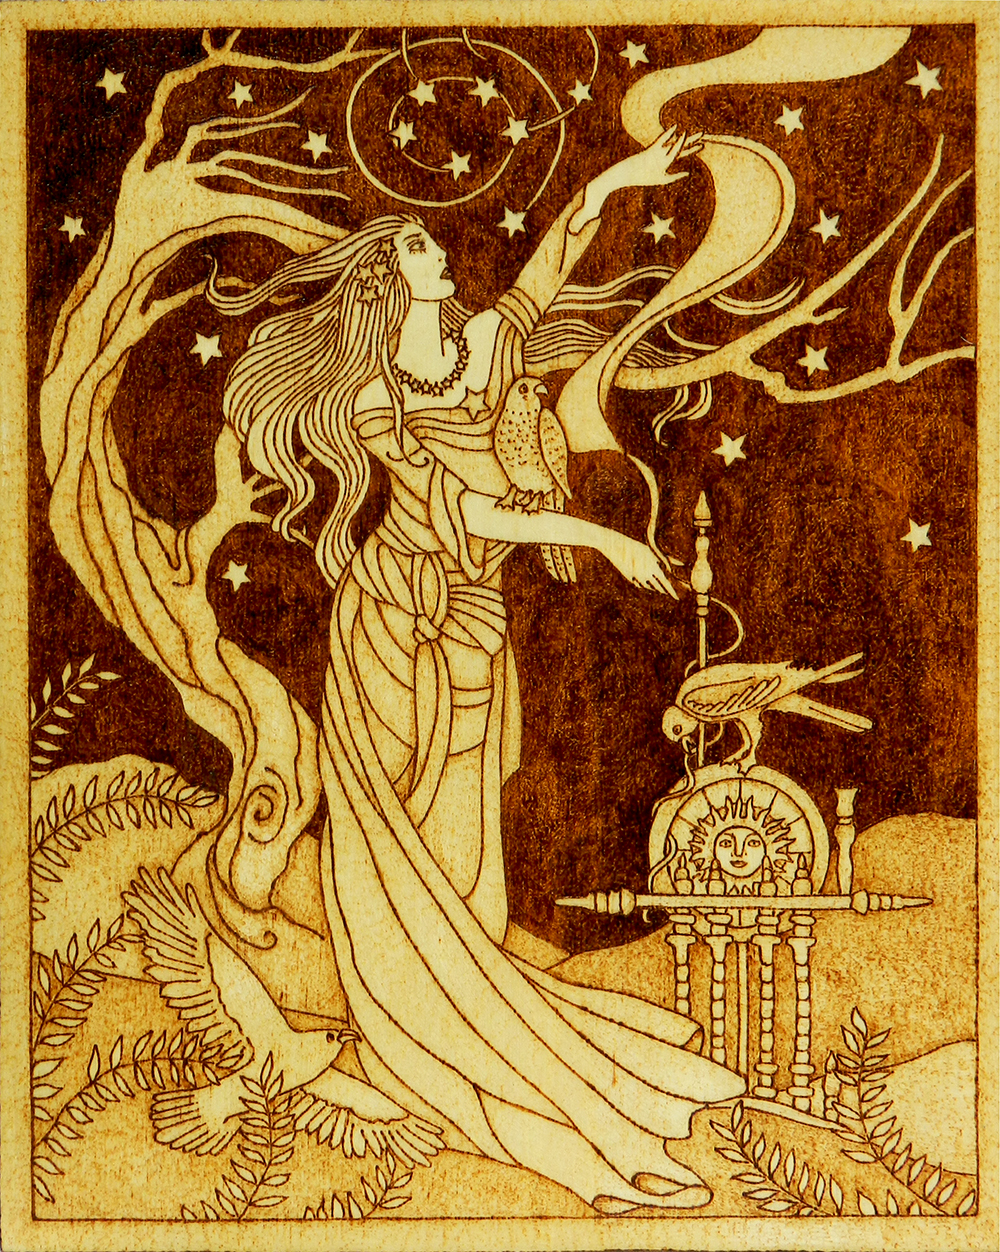 The illustration depicts Frigg in a flowing gown gazing up at the night sky. 